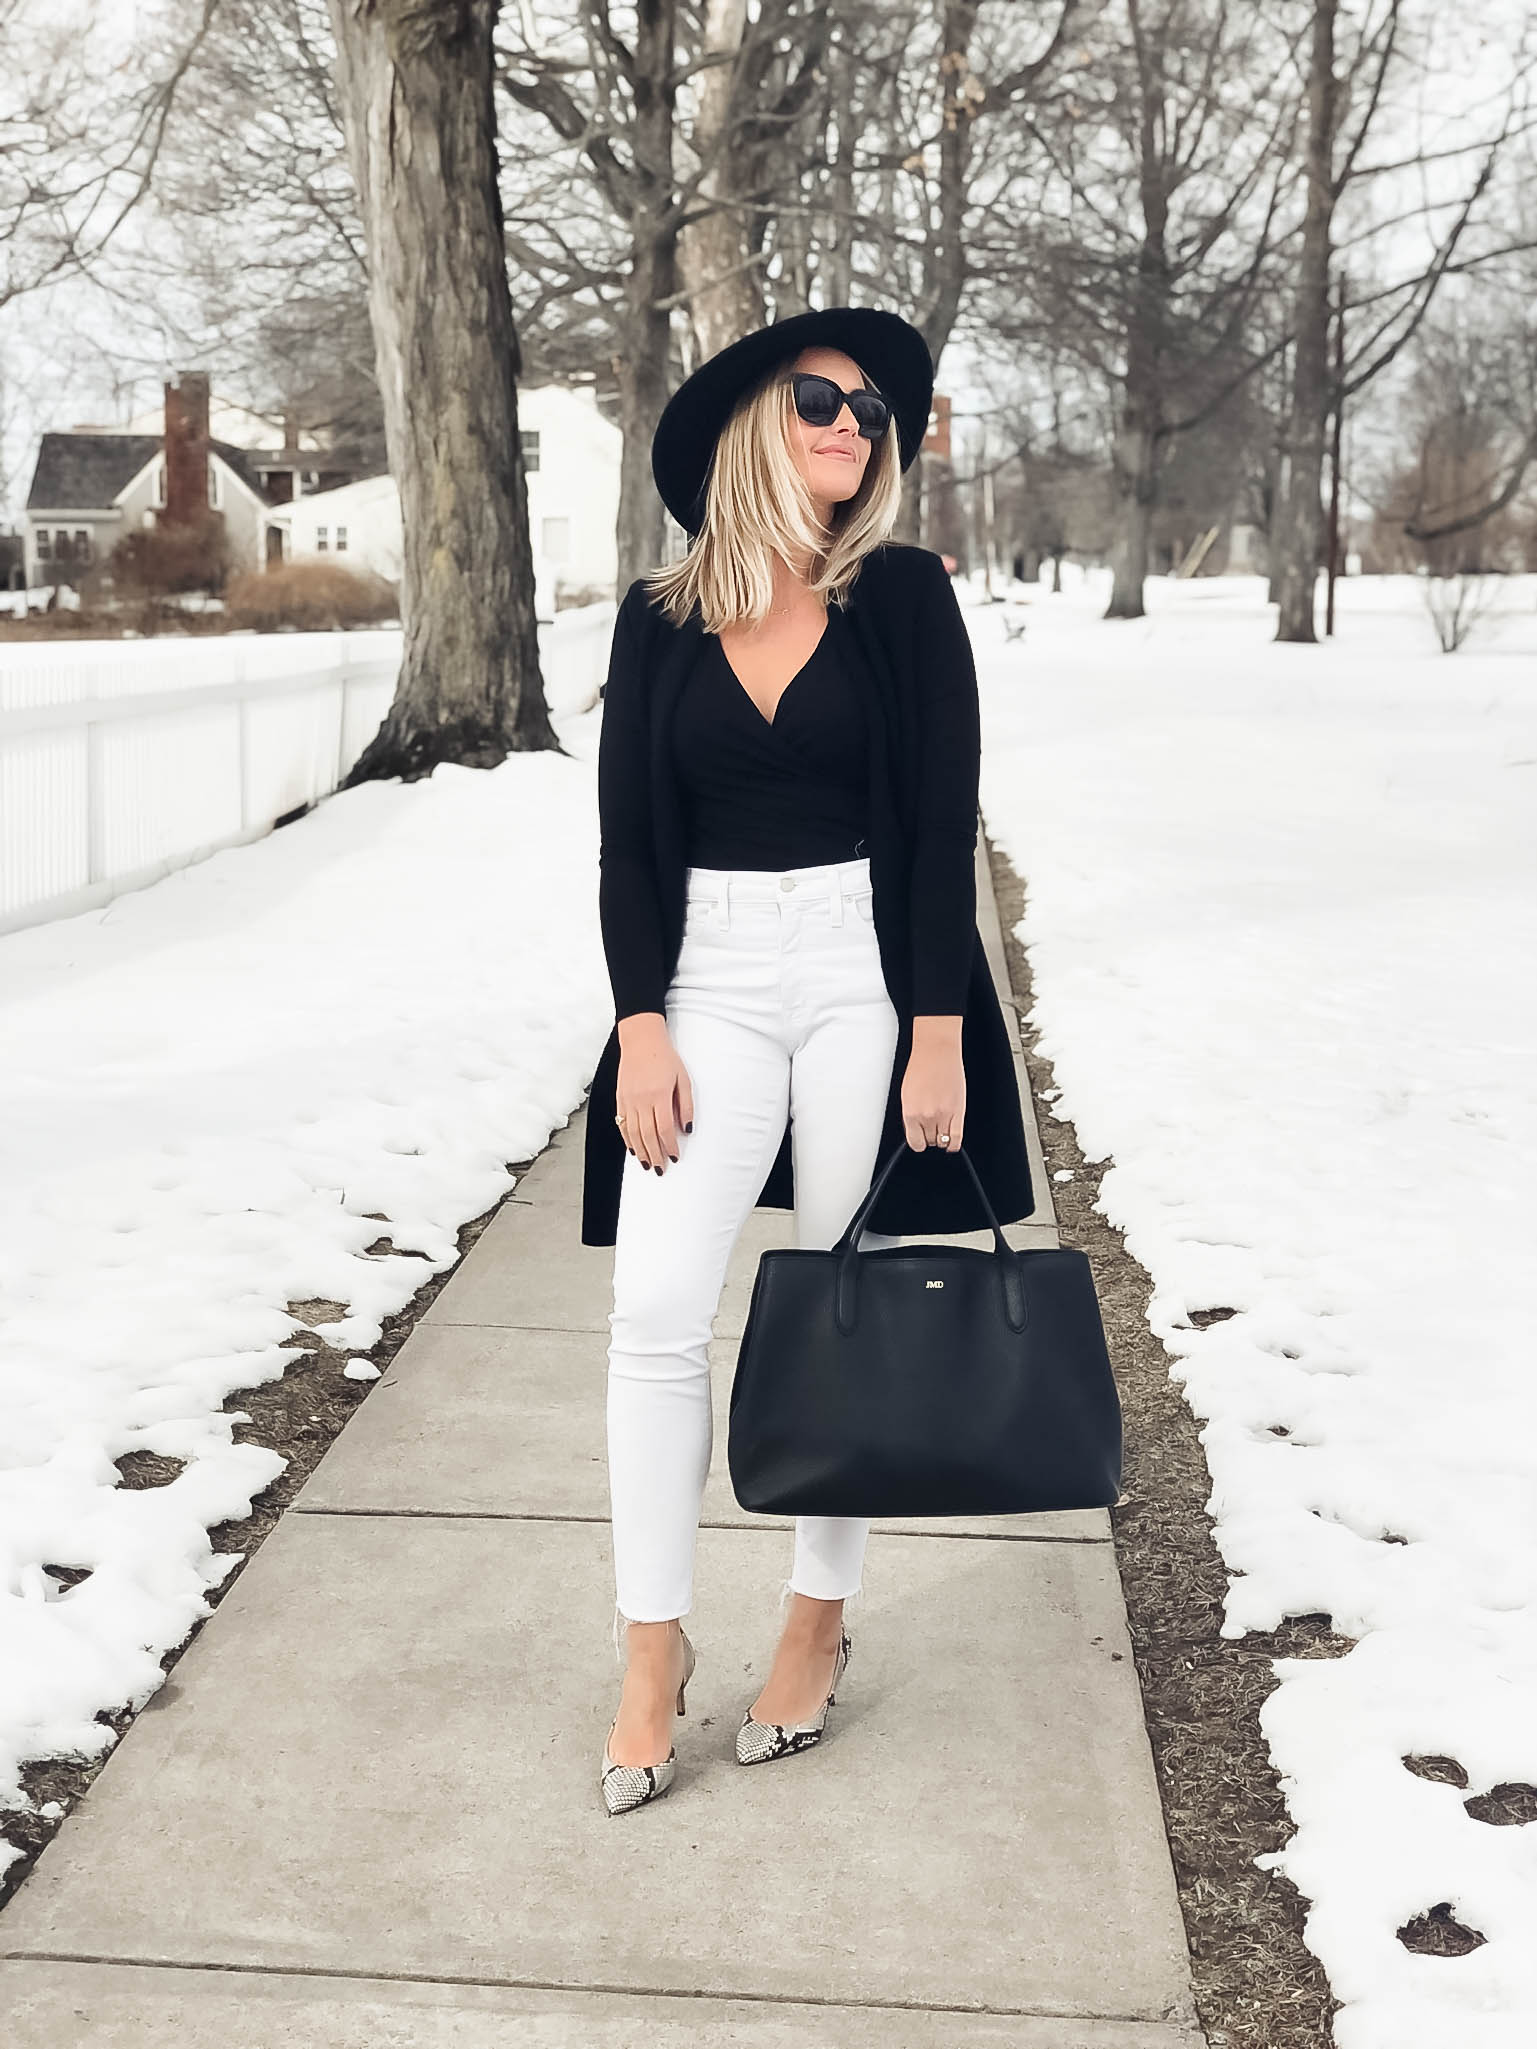 93 White Jeans Winter Weather ideas